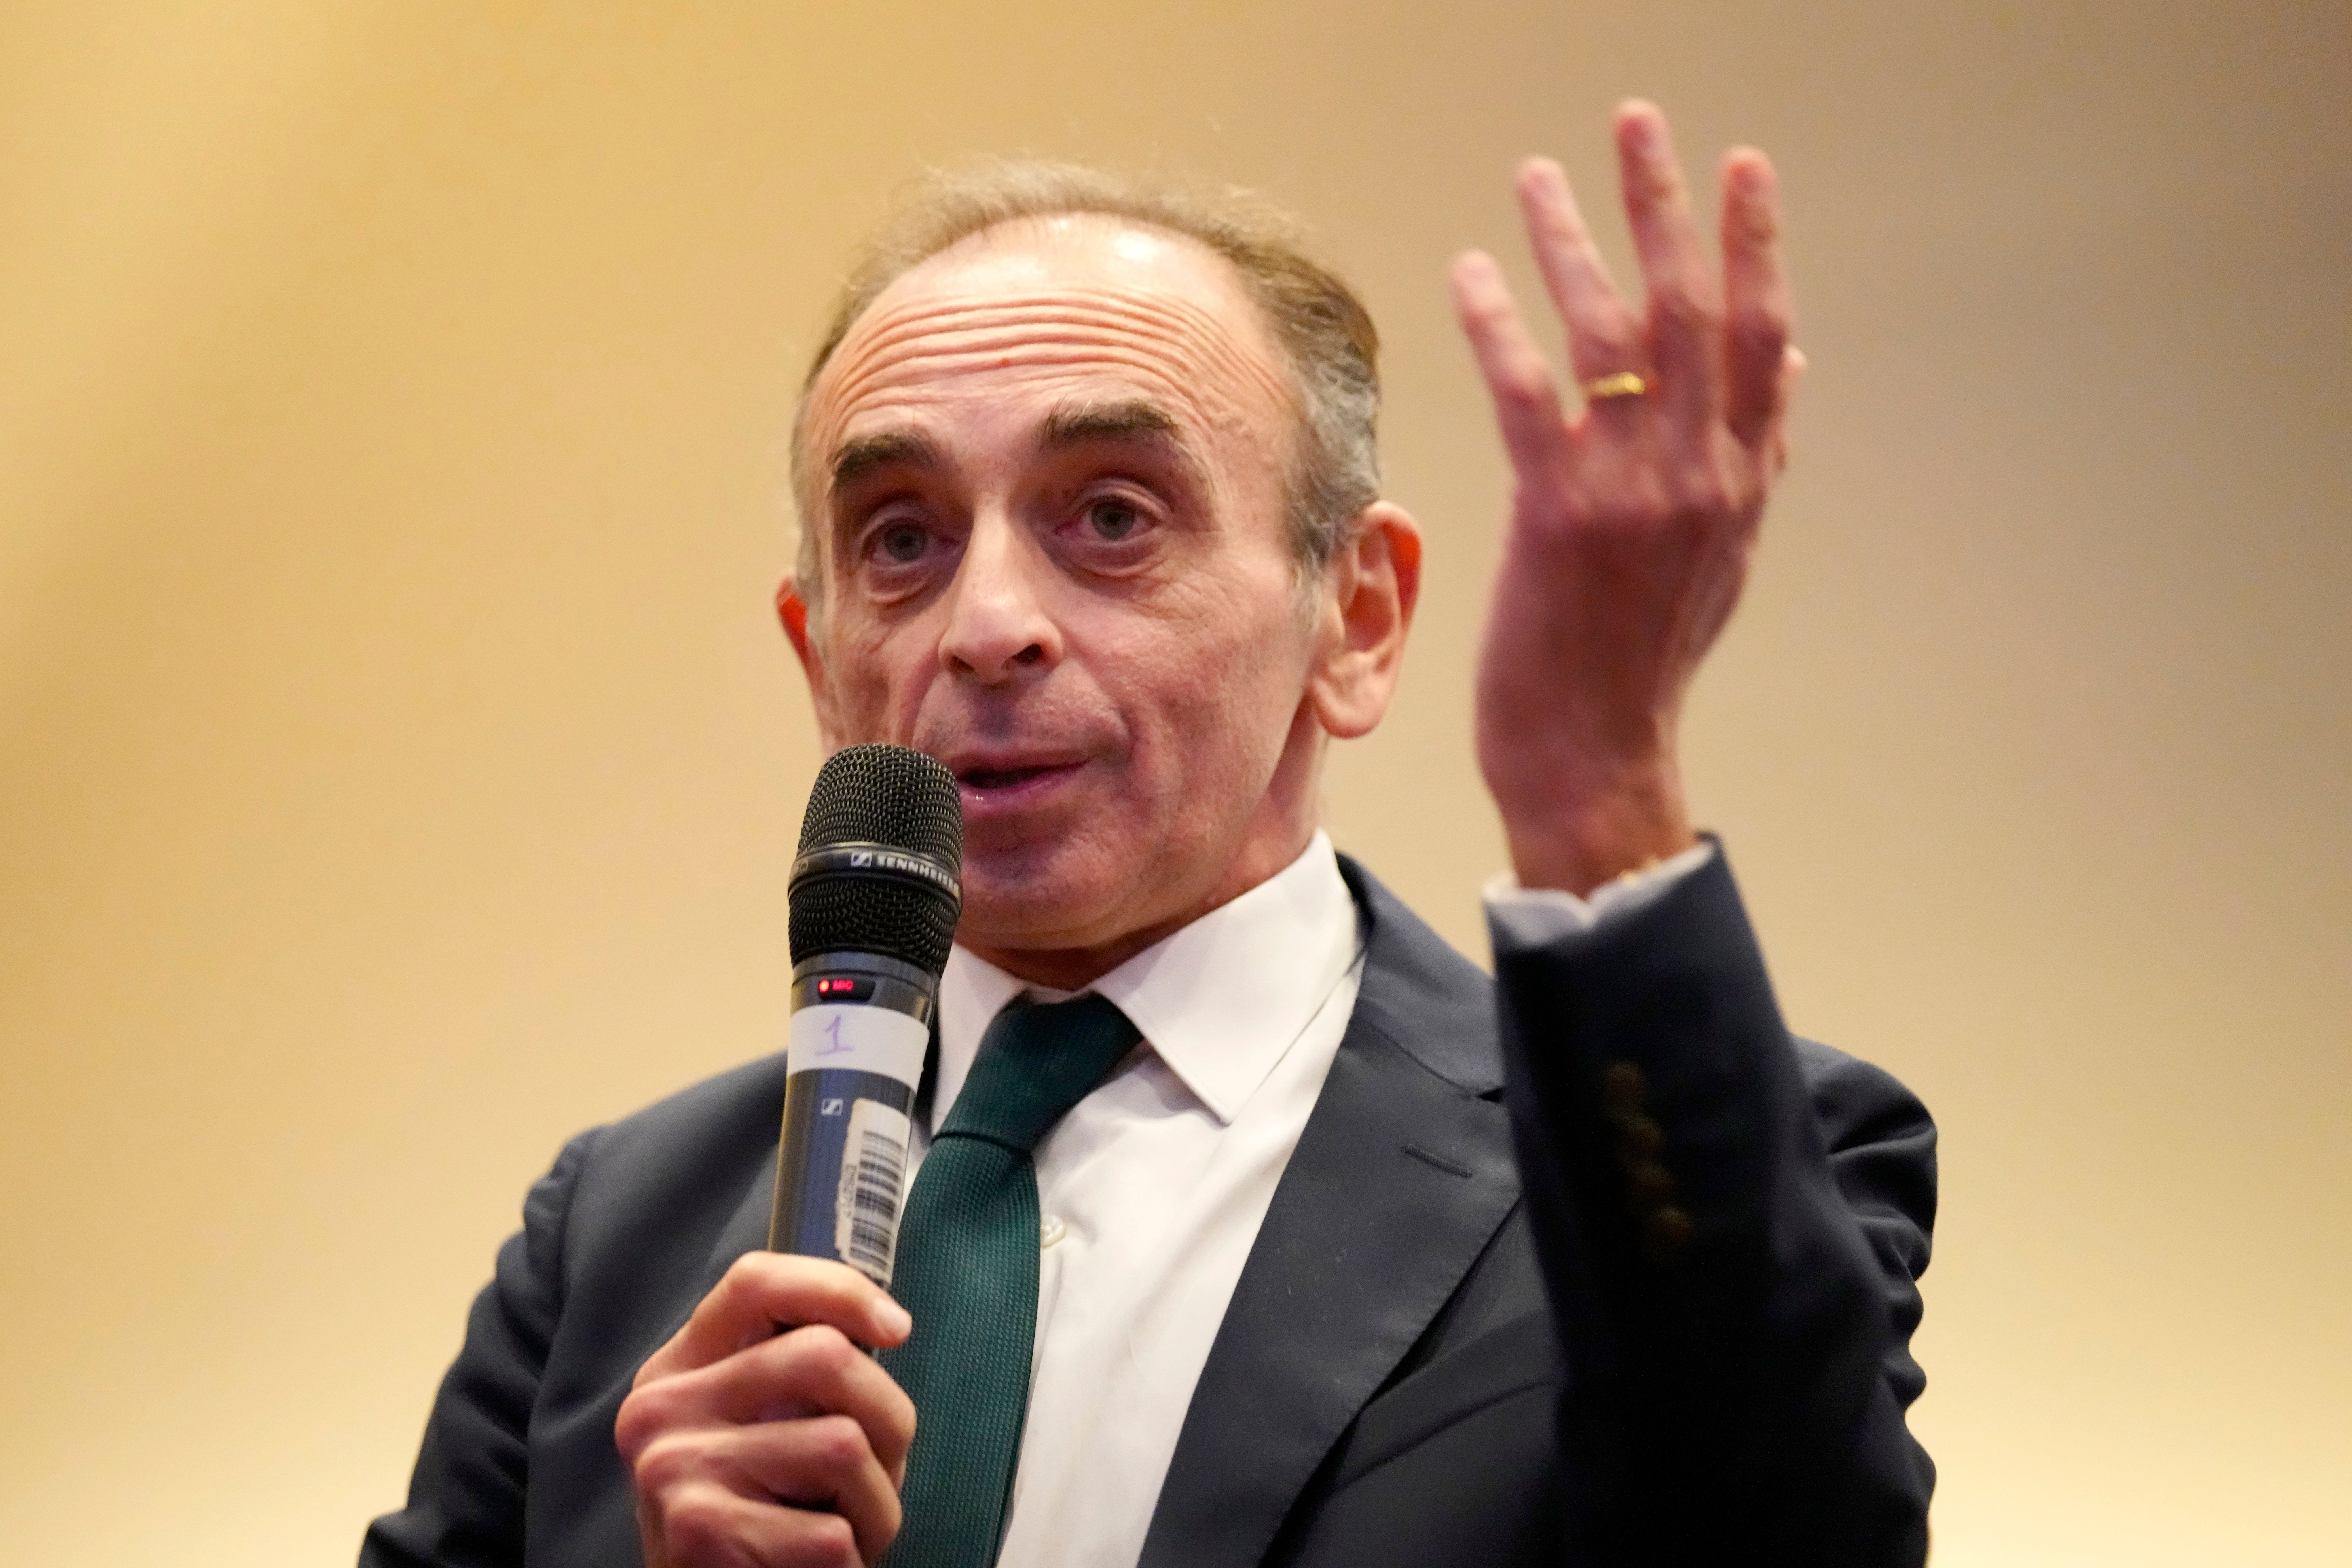 Eric Zemmour, speaking in London last month